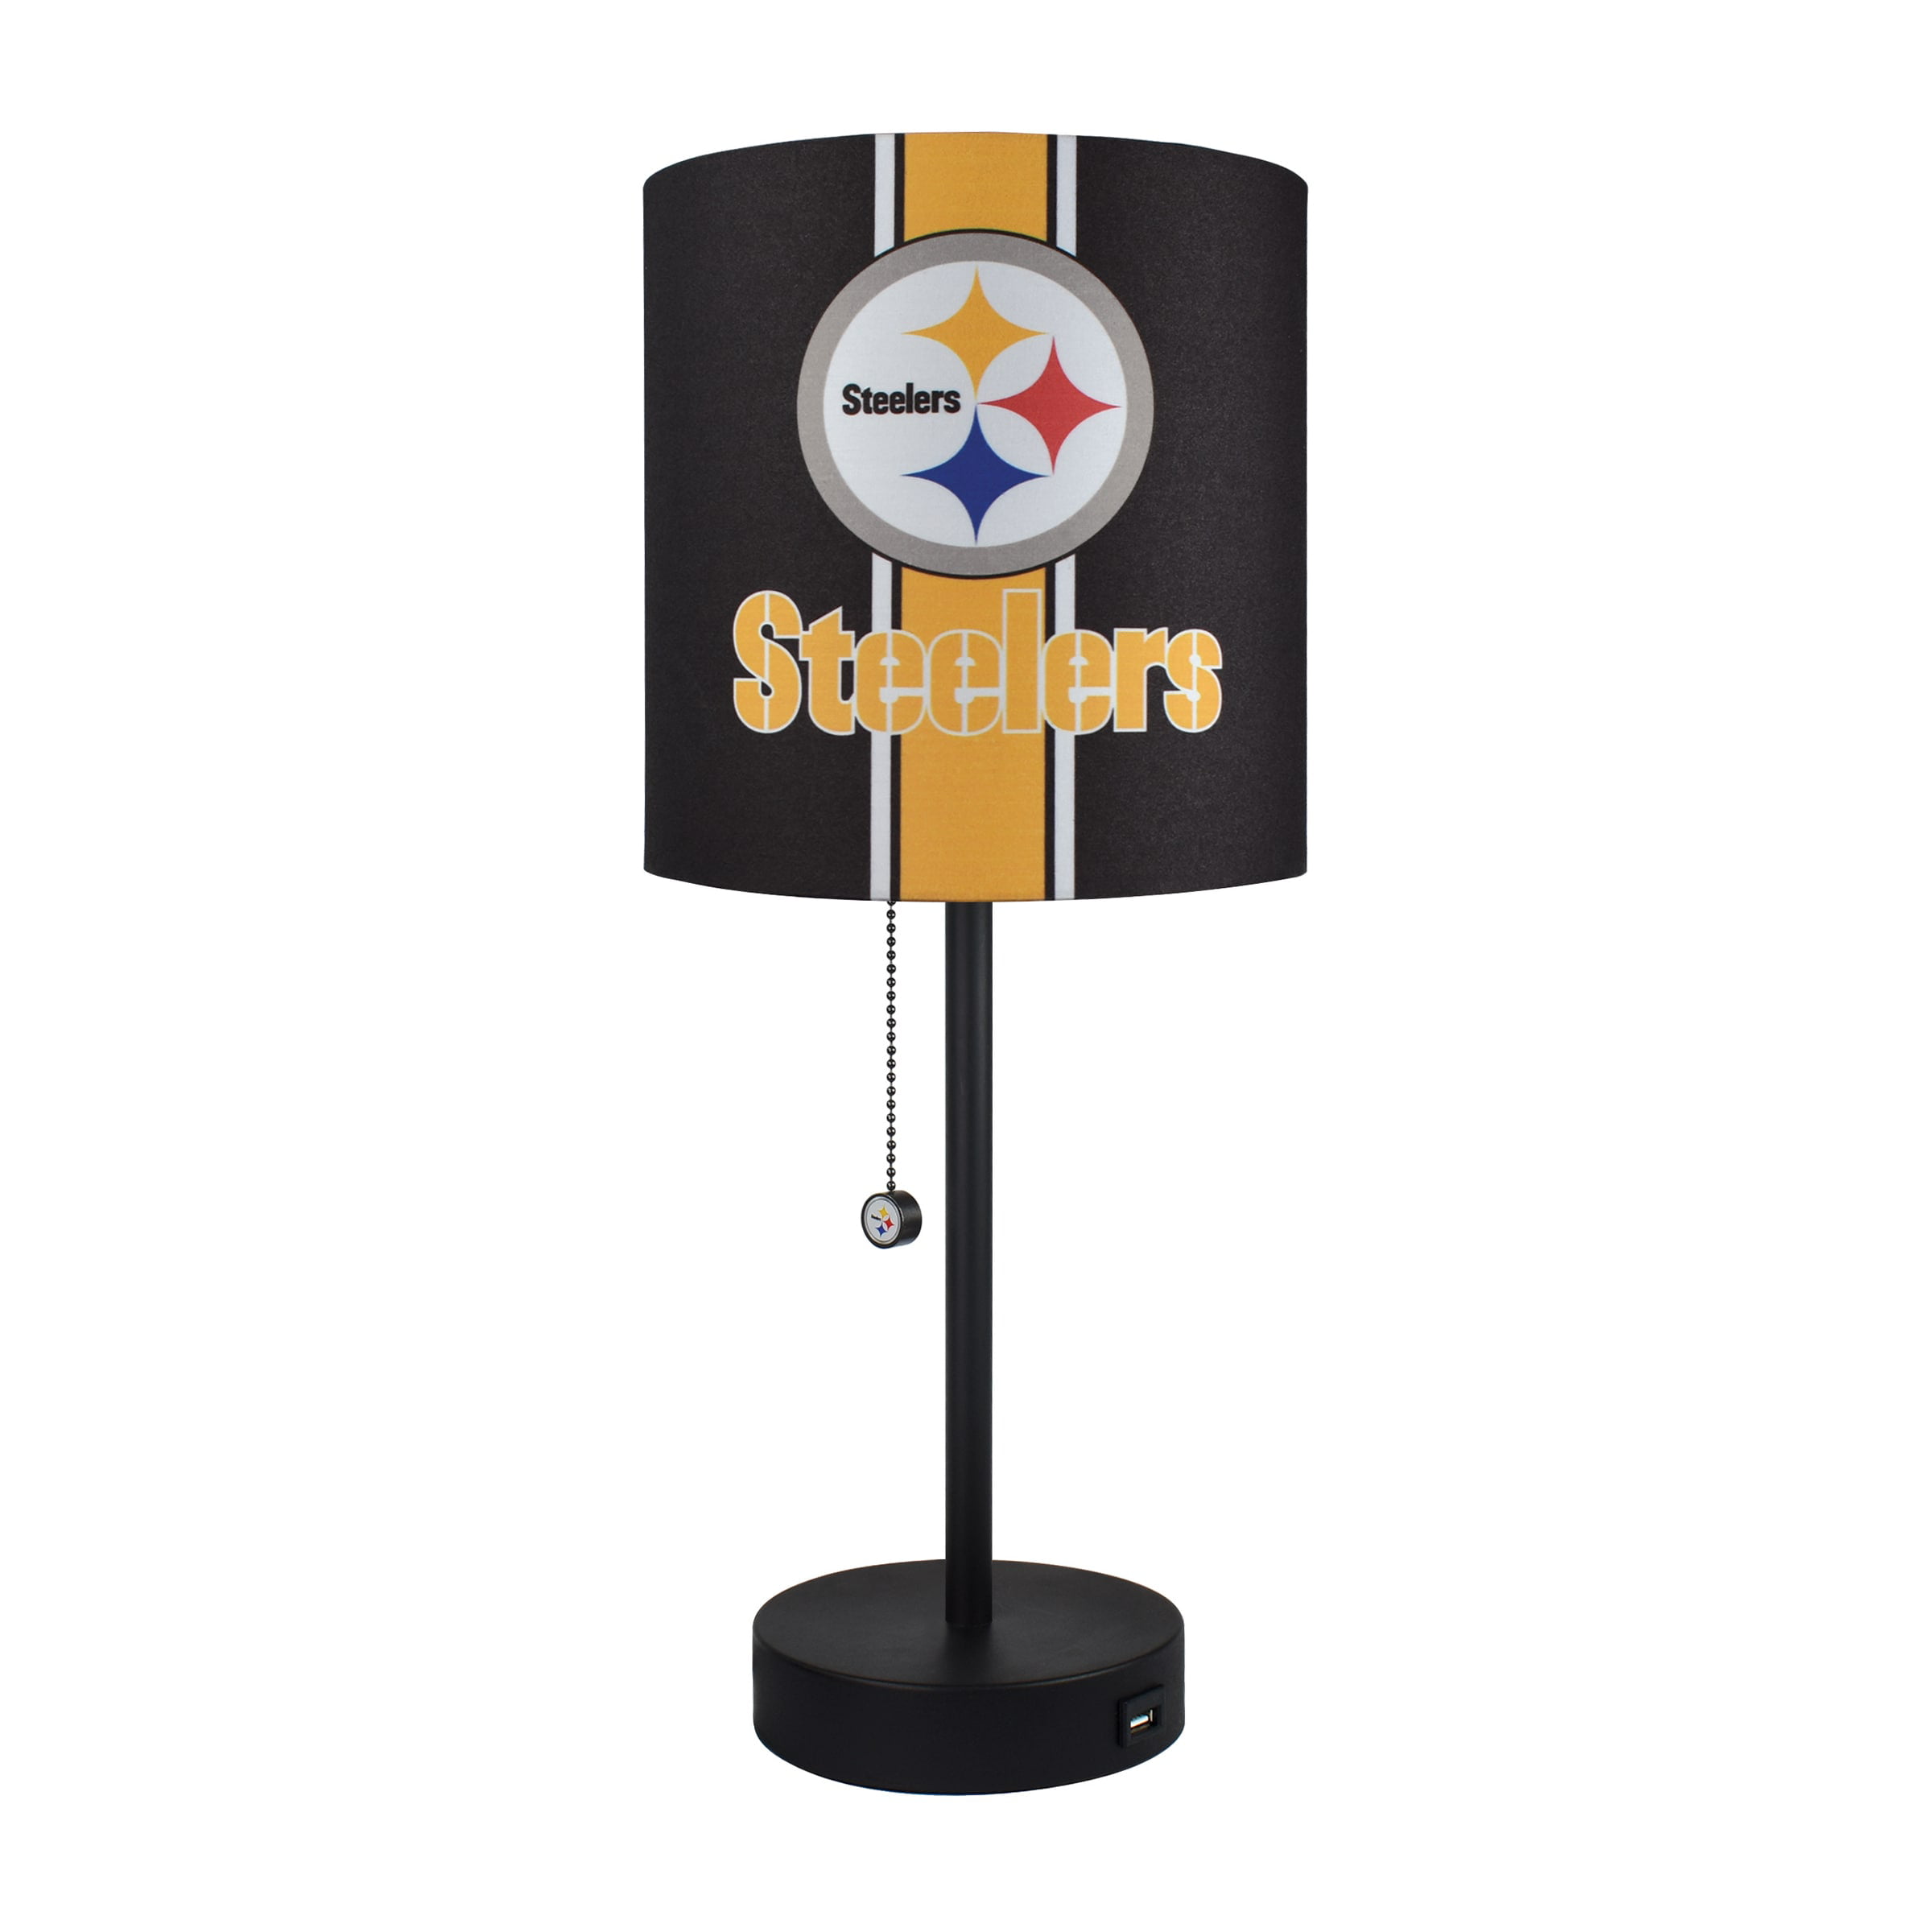 PS Table Lamp with Shade Pittsburgh Your Favorite Team Plate Rolled in on The lamp Base 